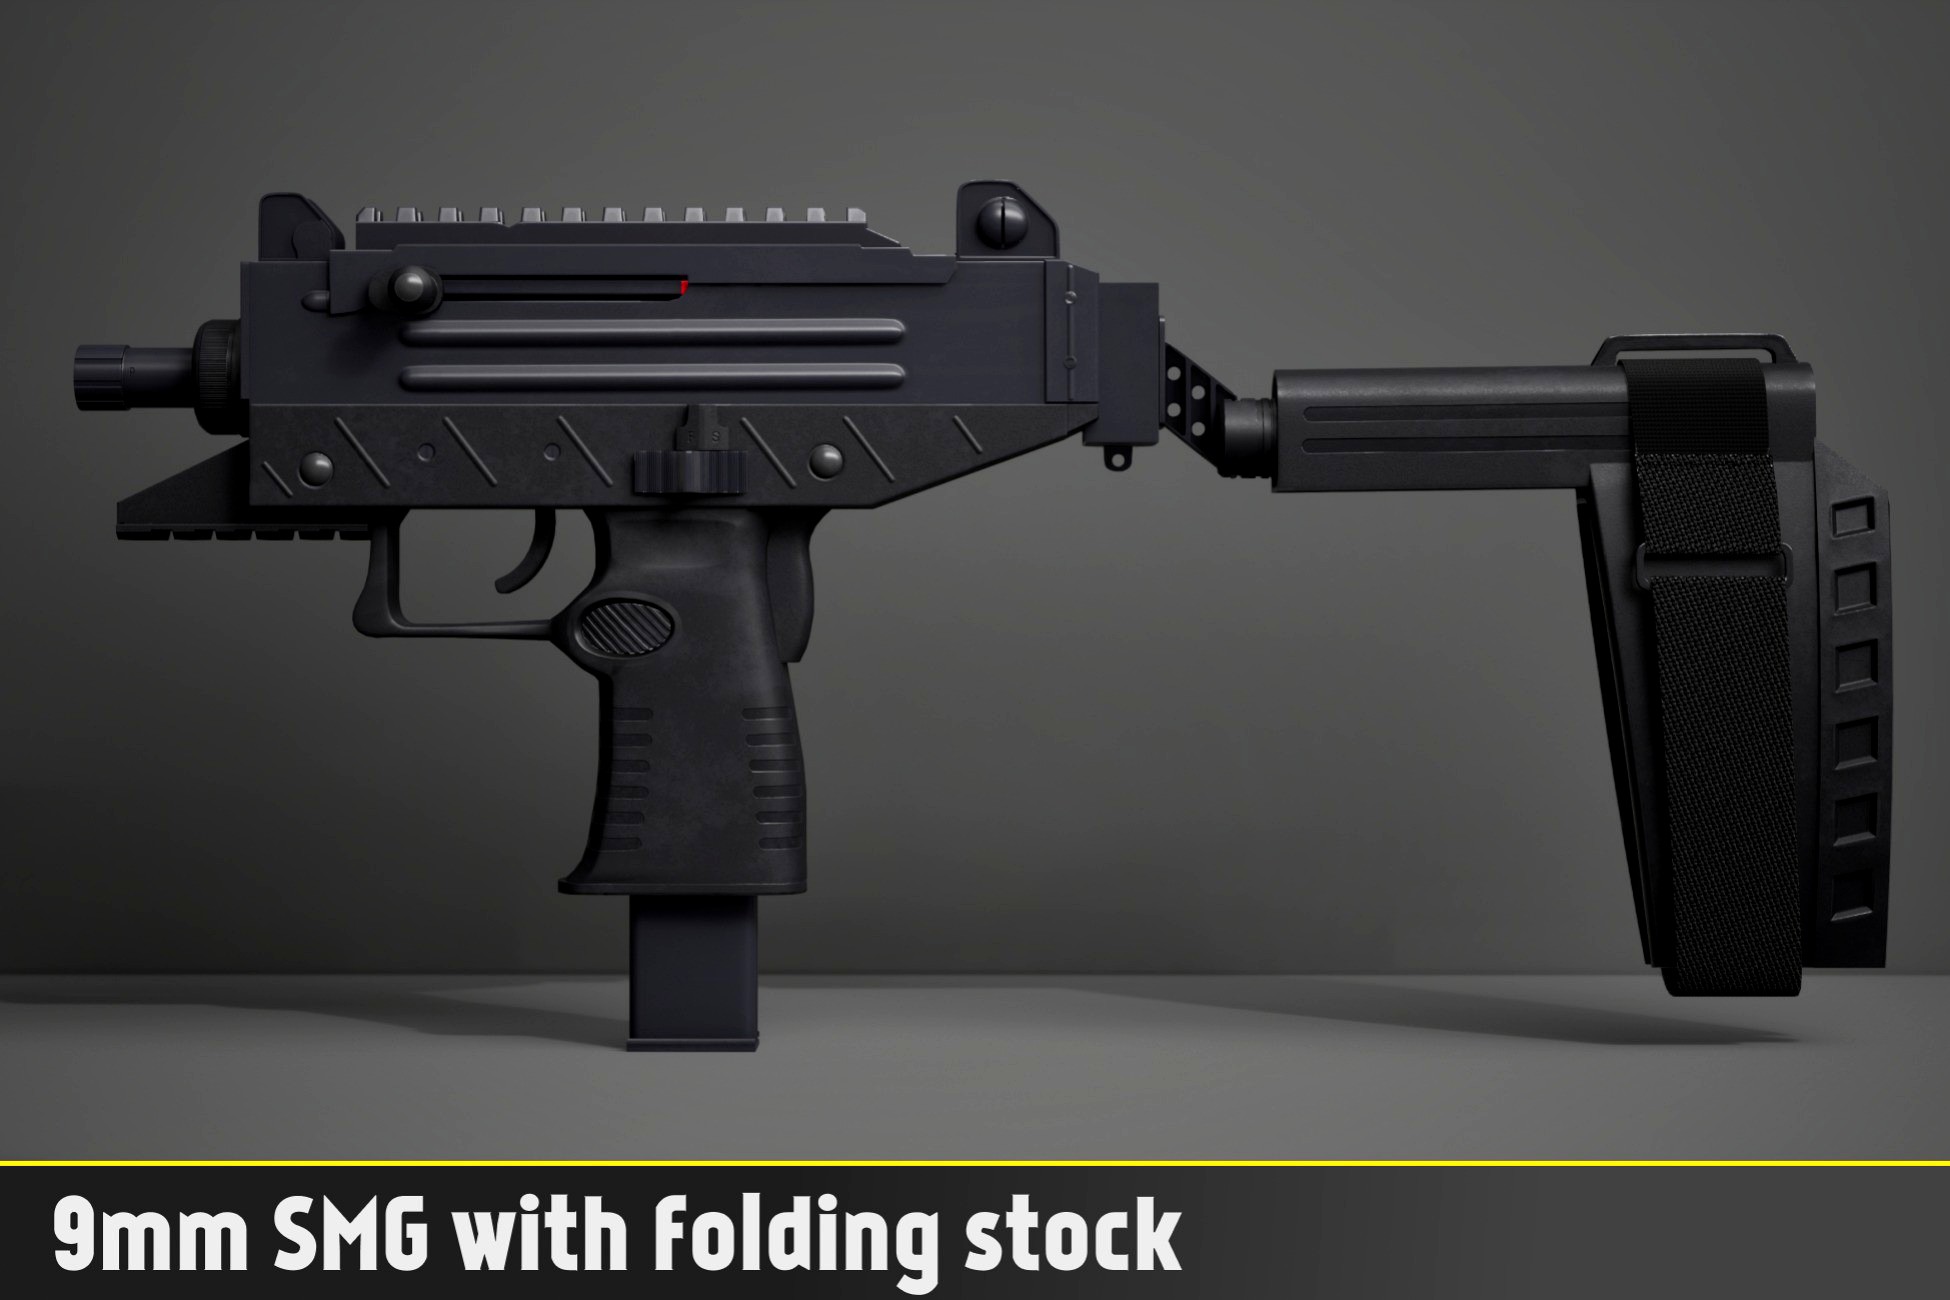 9mm SMG with folding stock